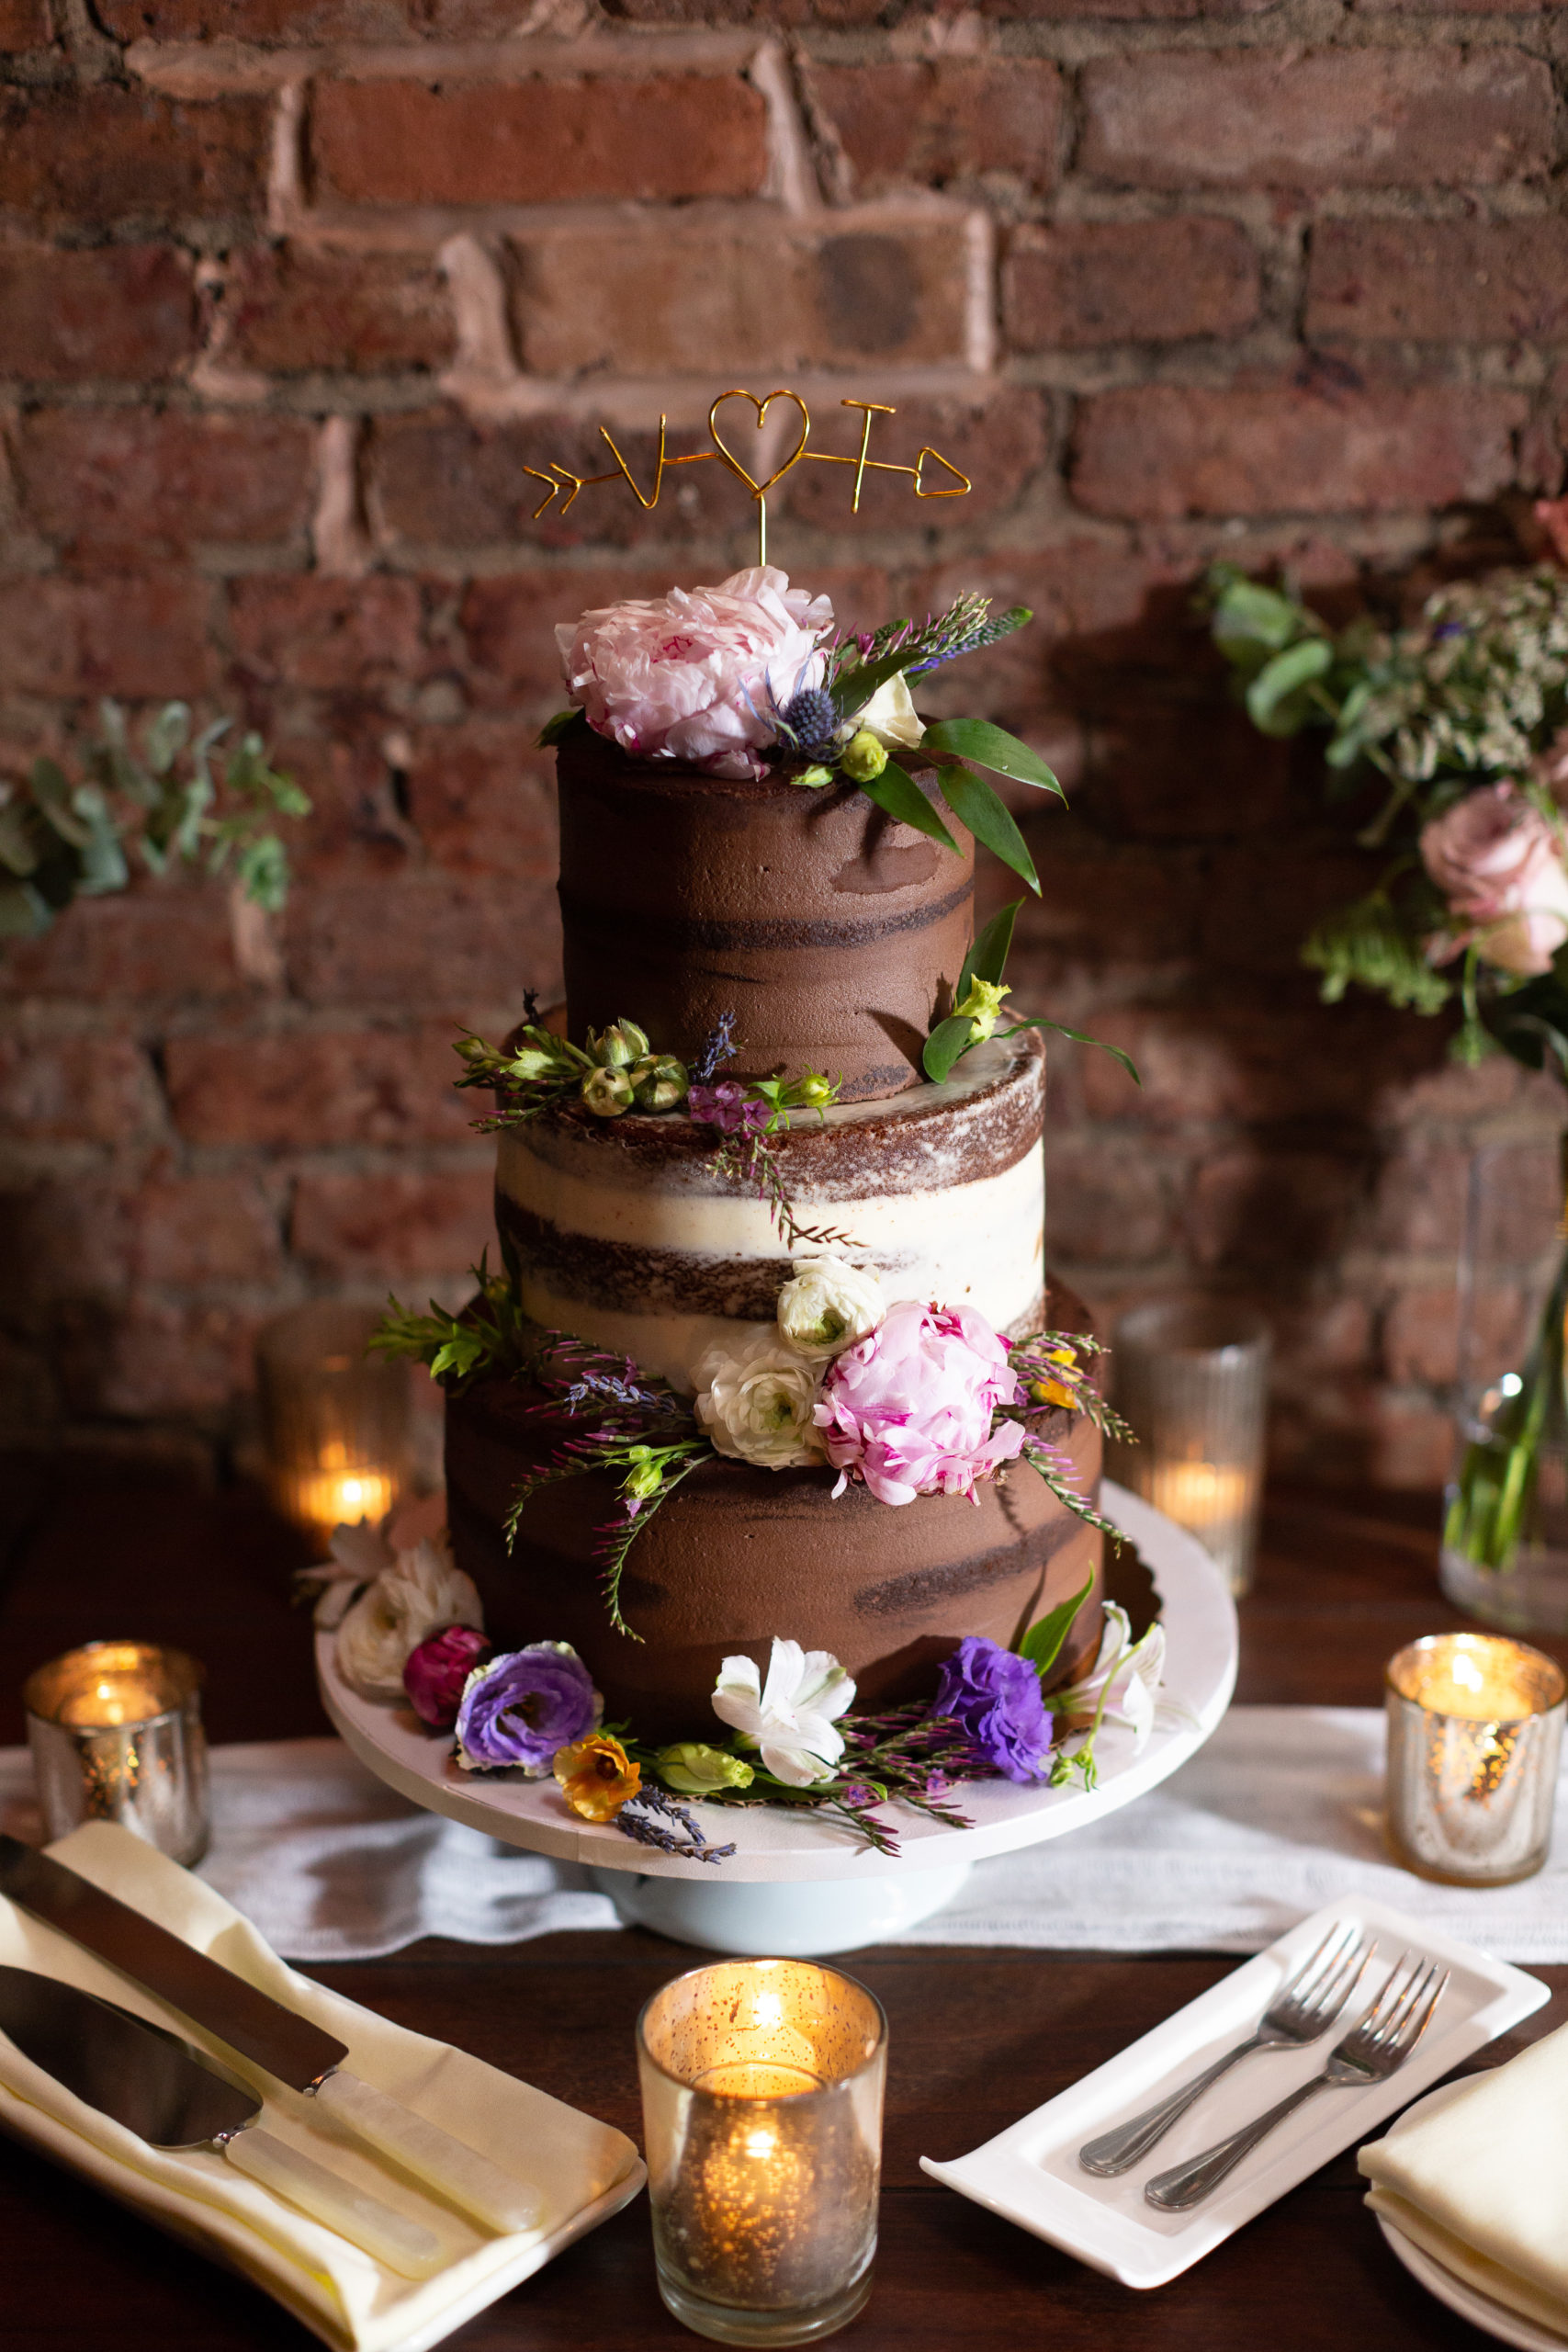 Naked Chocolate Cake with Flowers